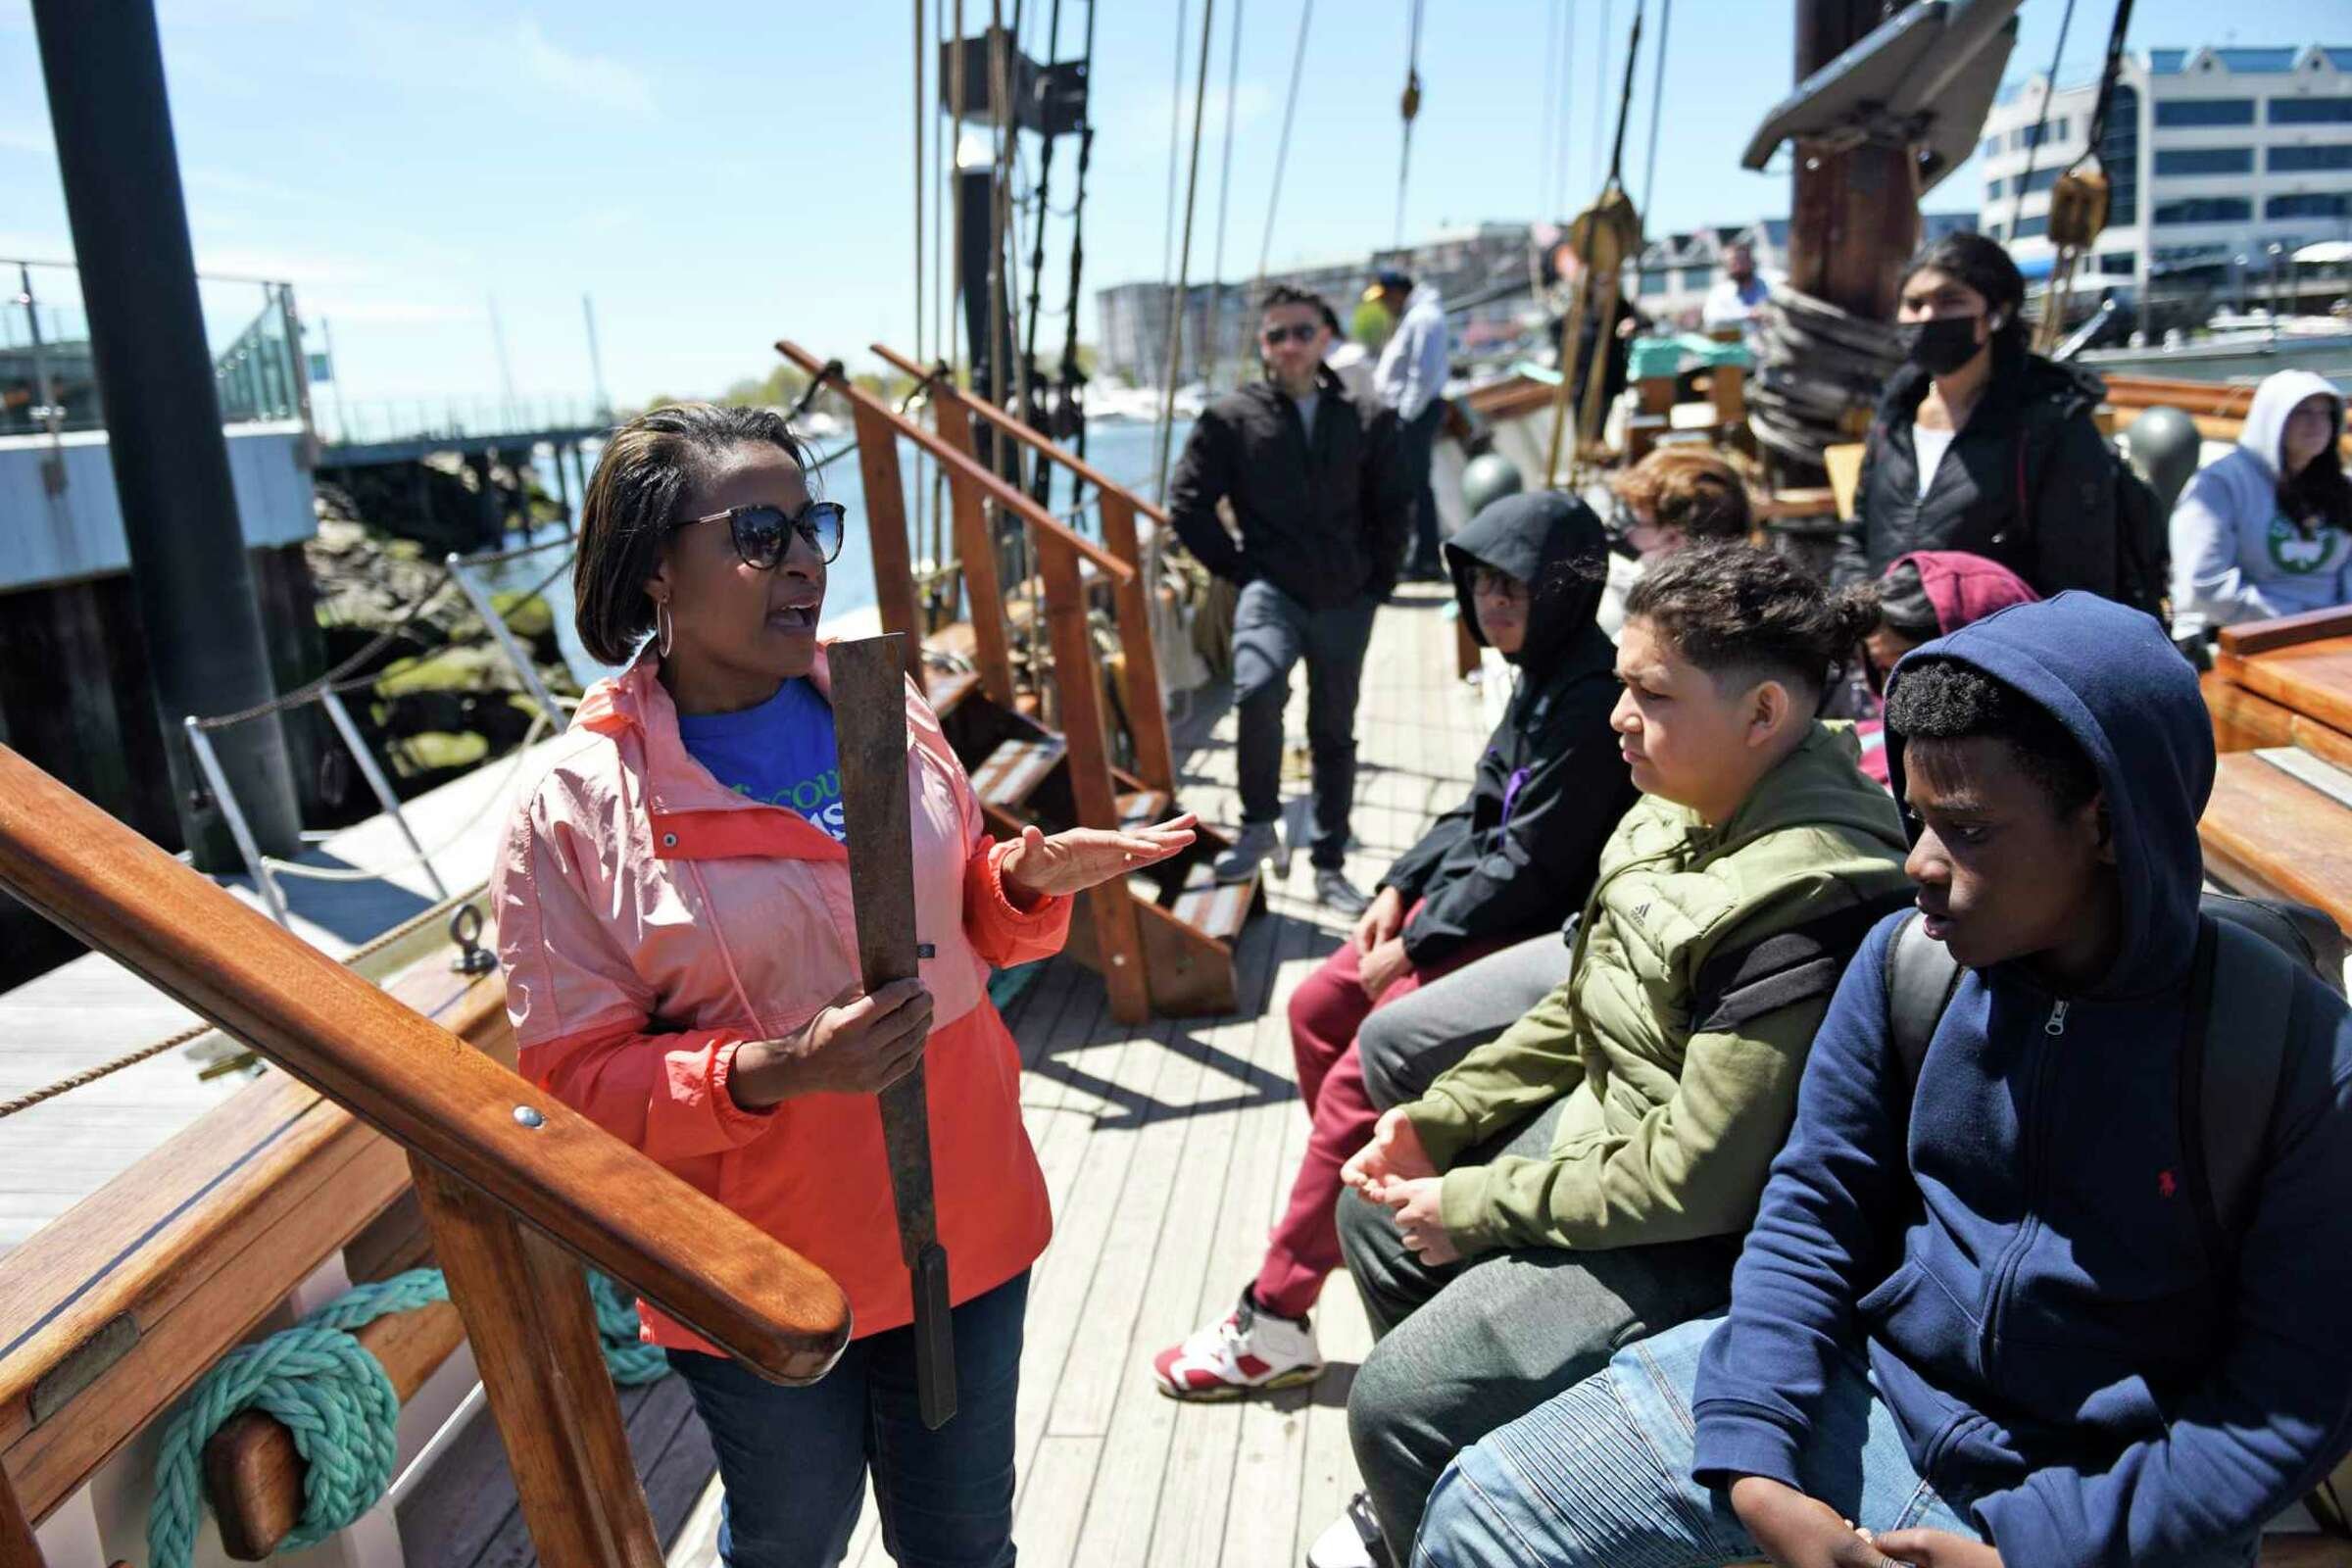  Discover Amistad educator Reeshemah Nofleet tells students the history of the Amistad uprising aboard a reproduction of the ship docked at Harbor Point in Stamford, Conn. Monday, May 9, 2022. Eighth grade students toured the ship to kick off the new